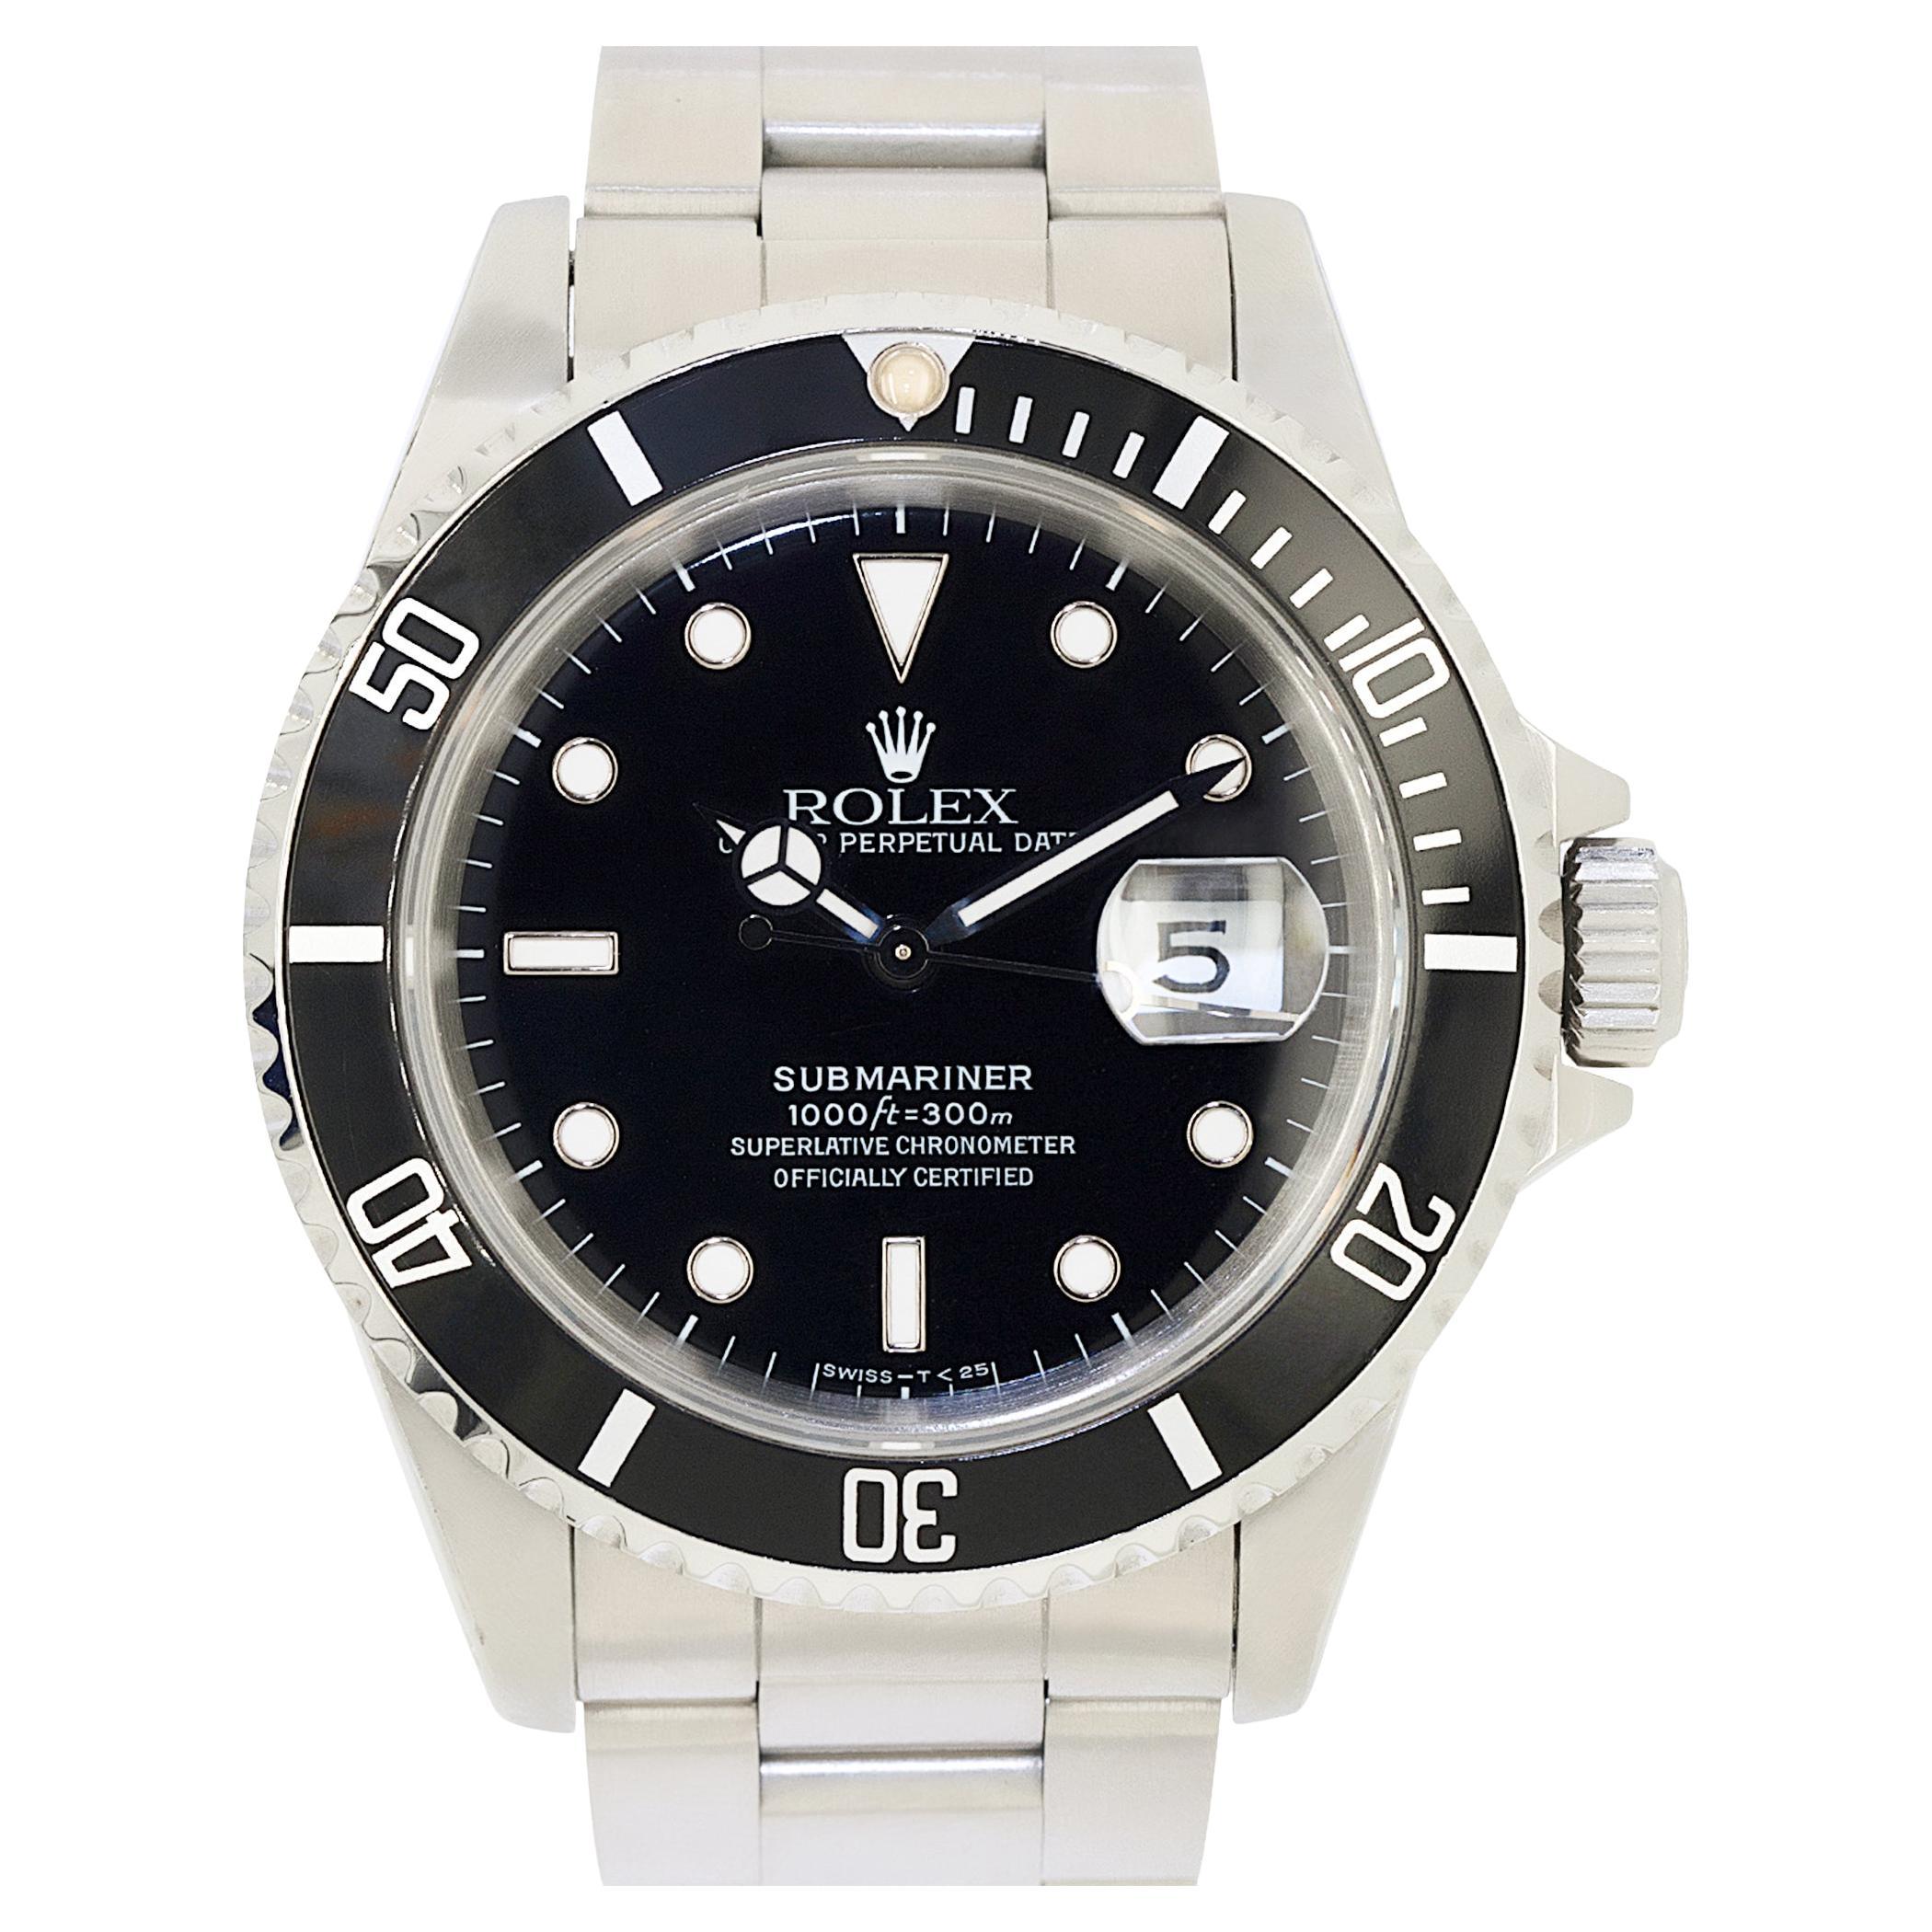 Rolex Submariner 16610 Stainless Steel Automatic Men's Watch For Sale